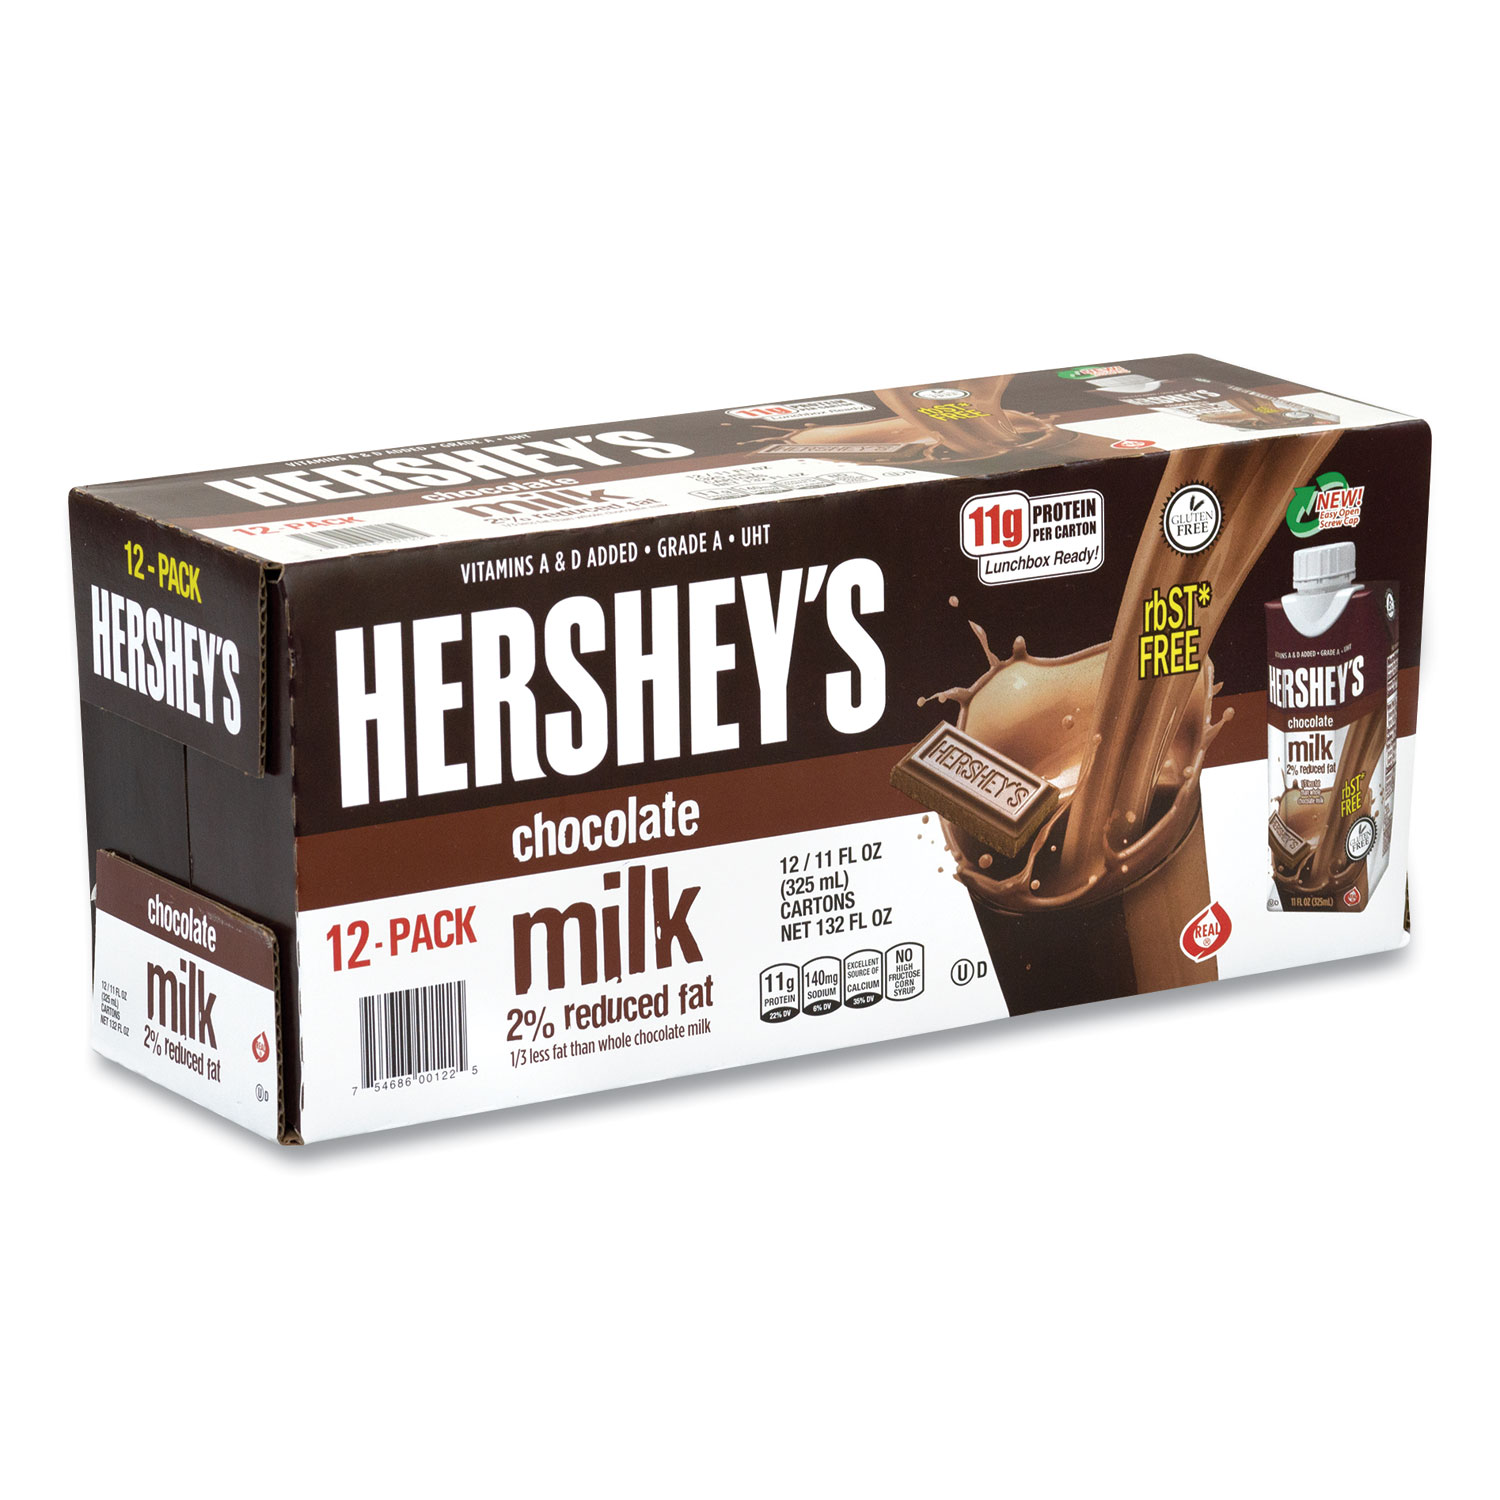  Hershey's 122 2% Reduced Fat Chocolate Milk, 11 oz, 12/Carton, Free Delivery in 1-4 Business Days (GRR22000811) 